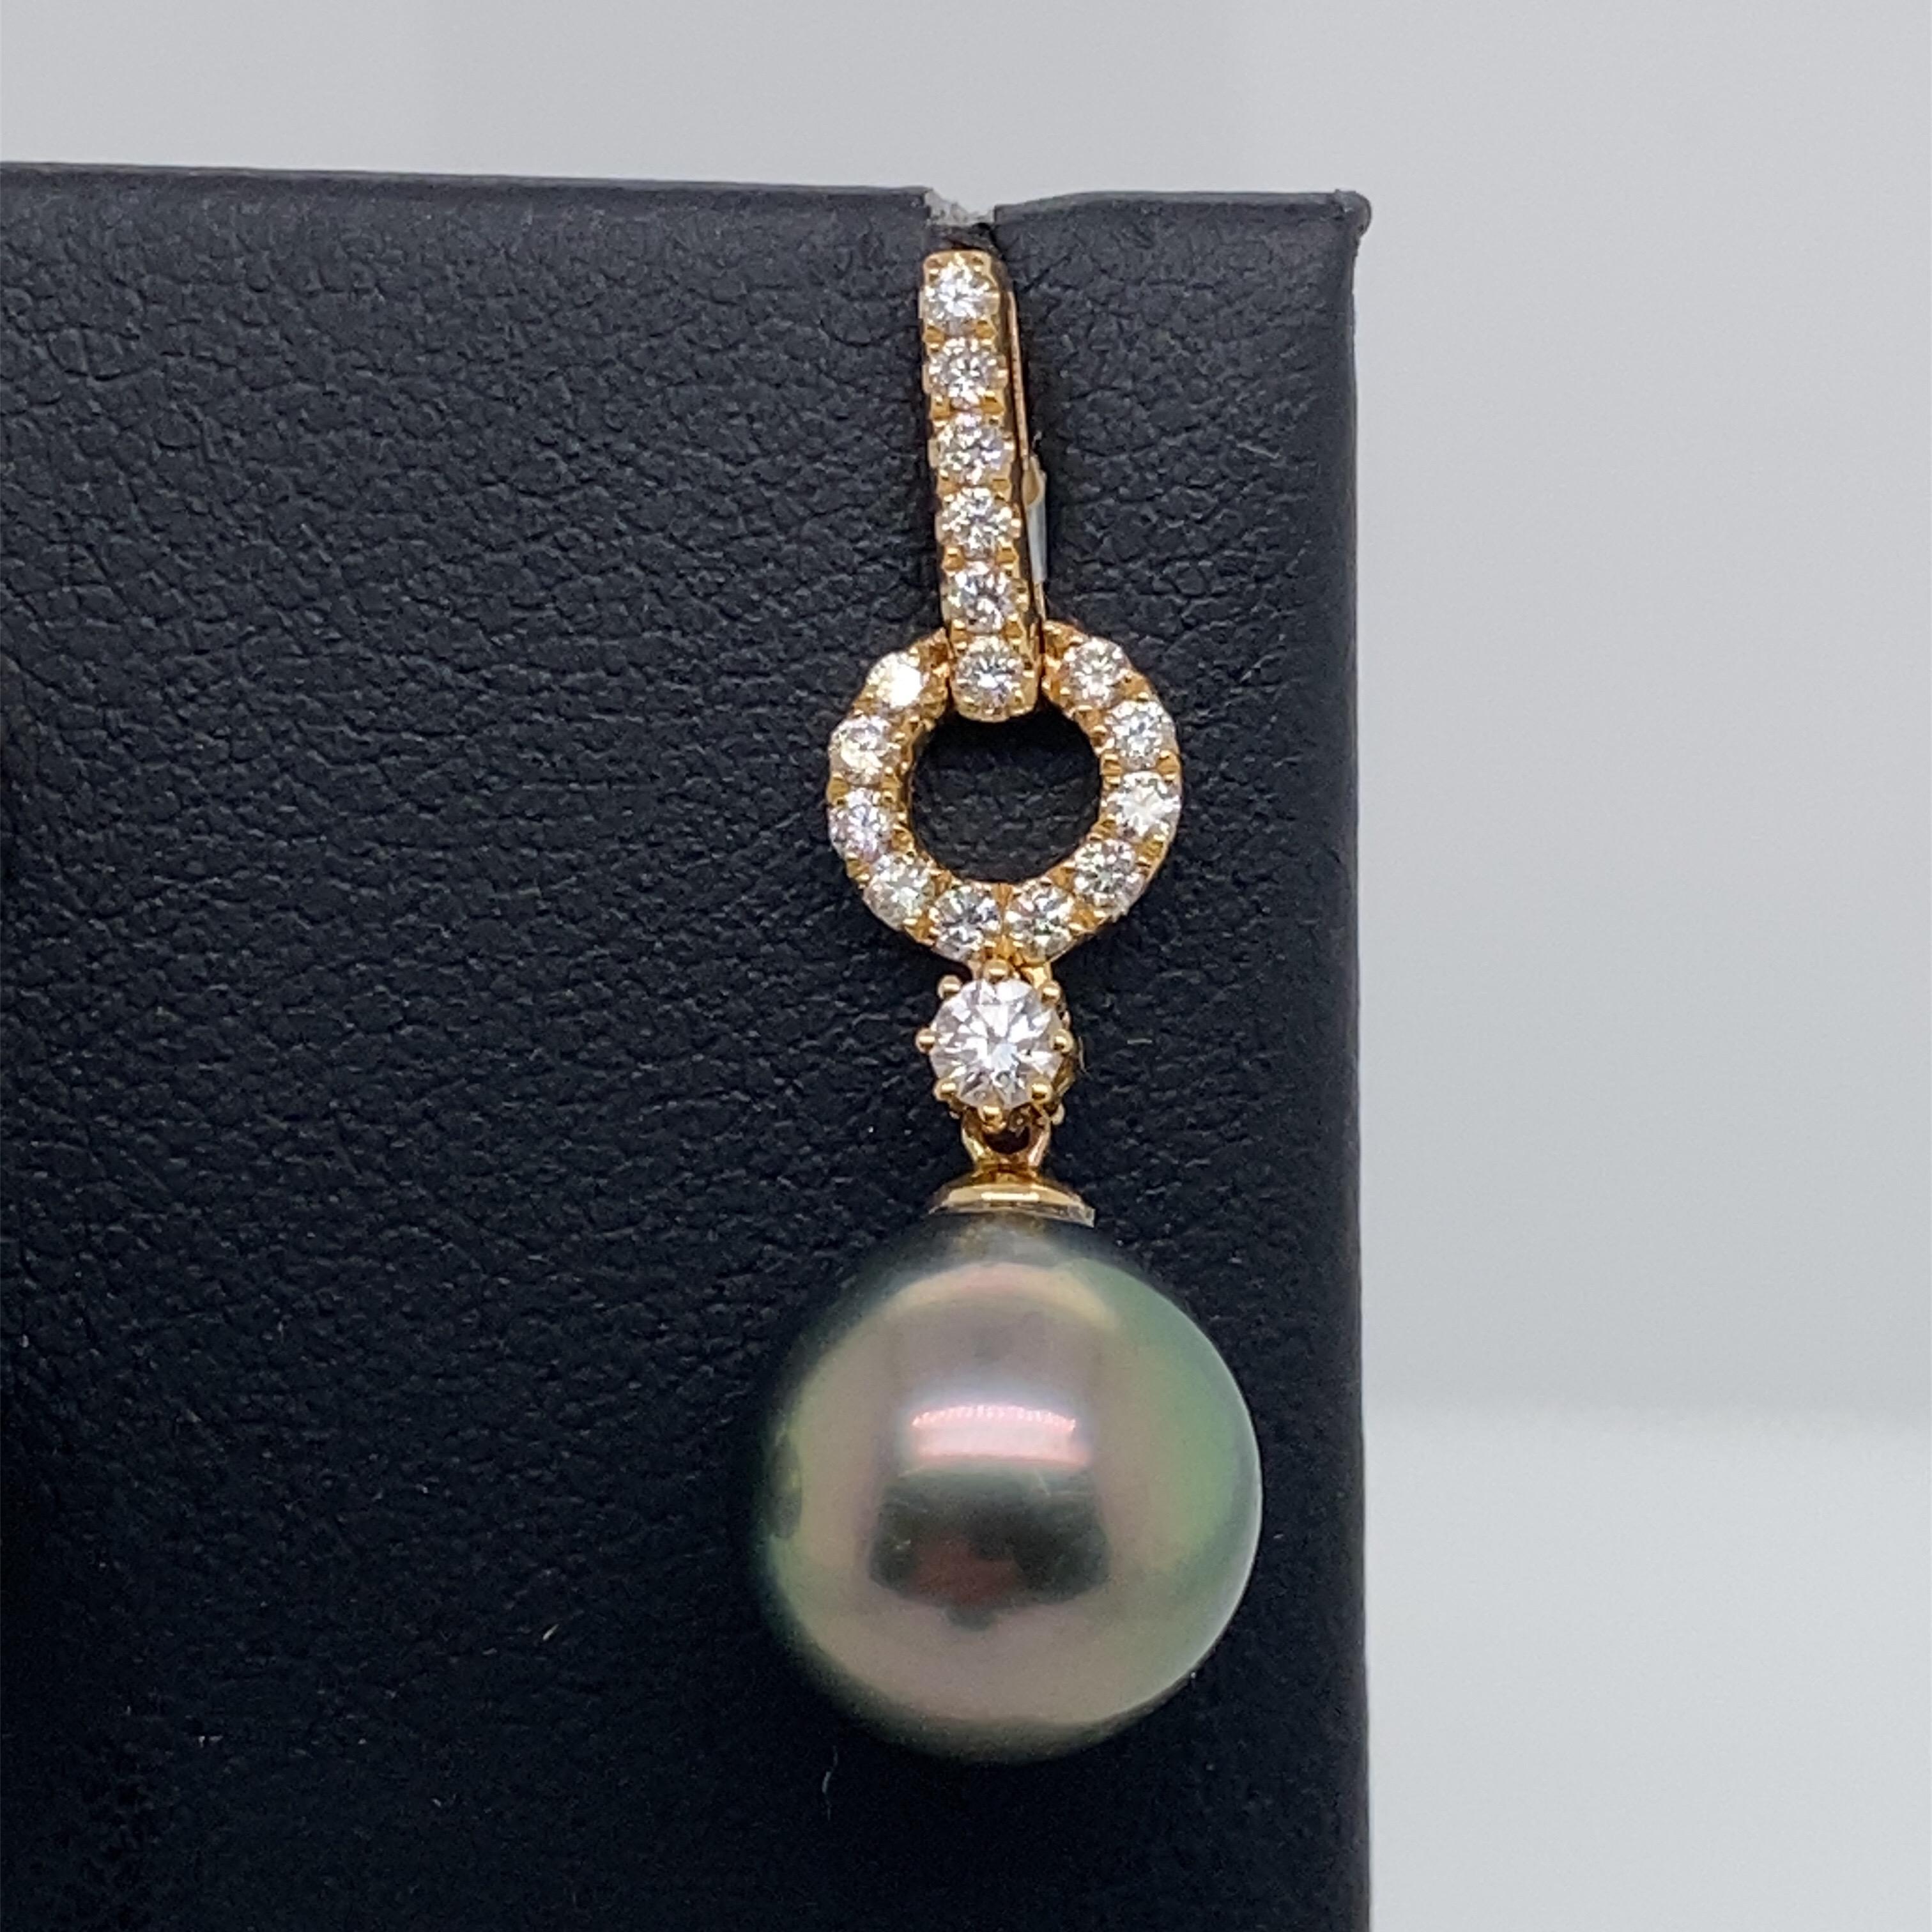 18K Yellow gold drop earrings featuring two Tahitian pearls measuring 11-12 mm flanked with 34 round brilliants weighing 0.61 carats. 
Color G-H
Clarity SI

Available in White Gold
Pearls can be changed to South Sea, Gold or Pink Freshwater
DM for